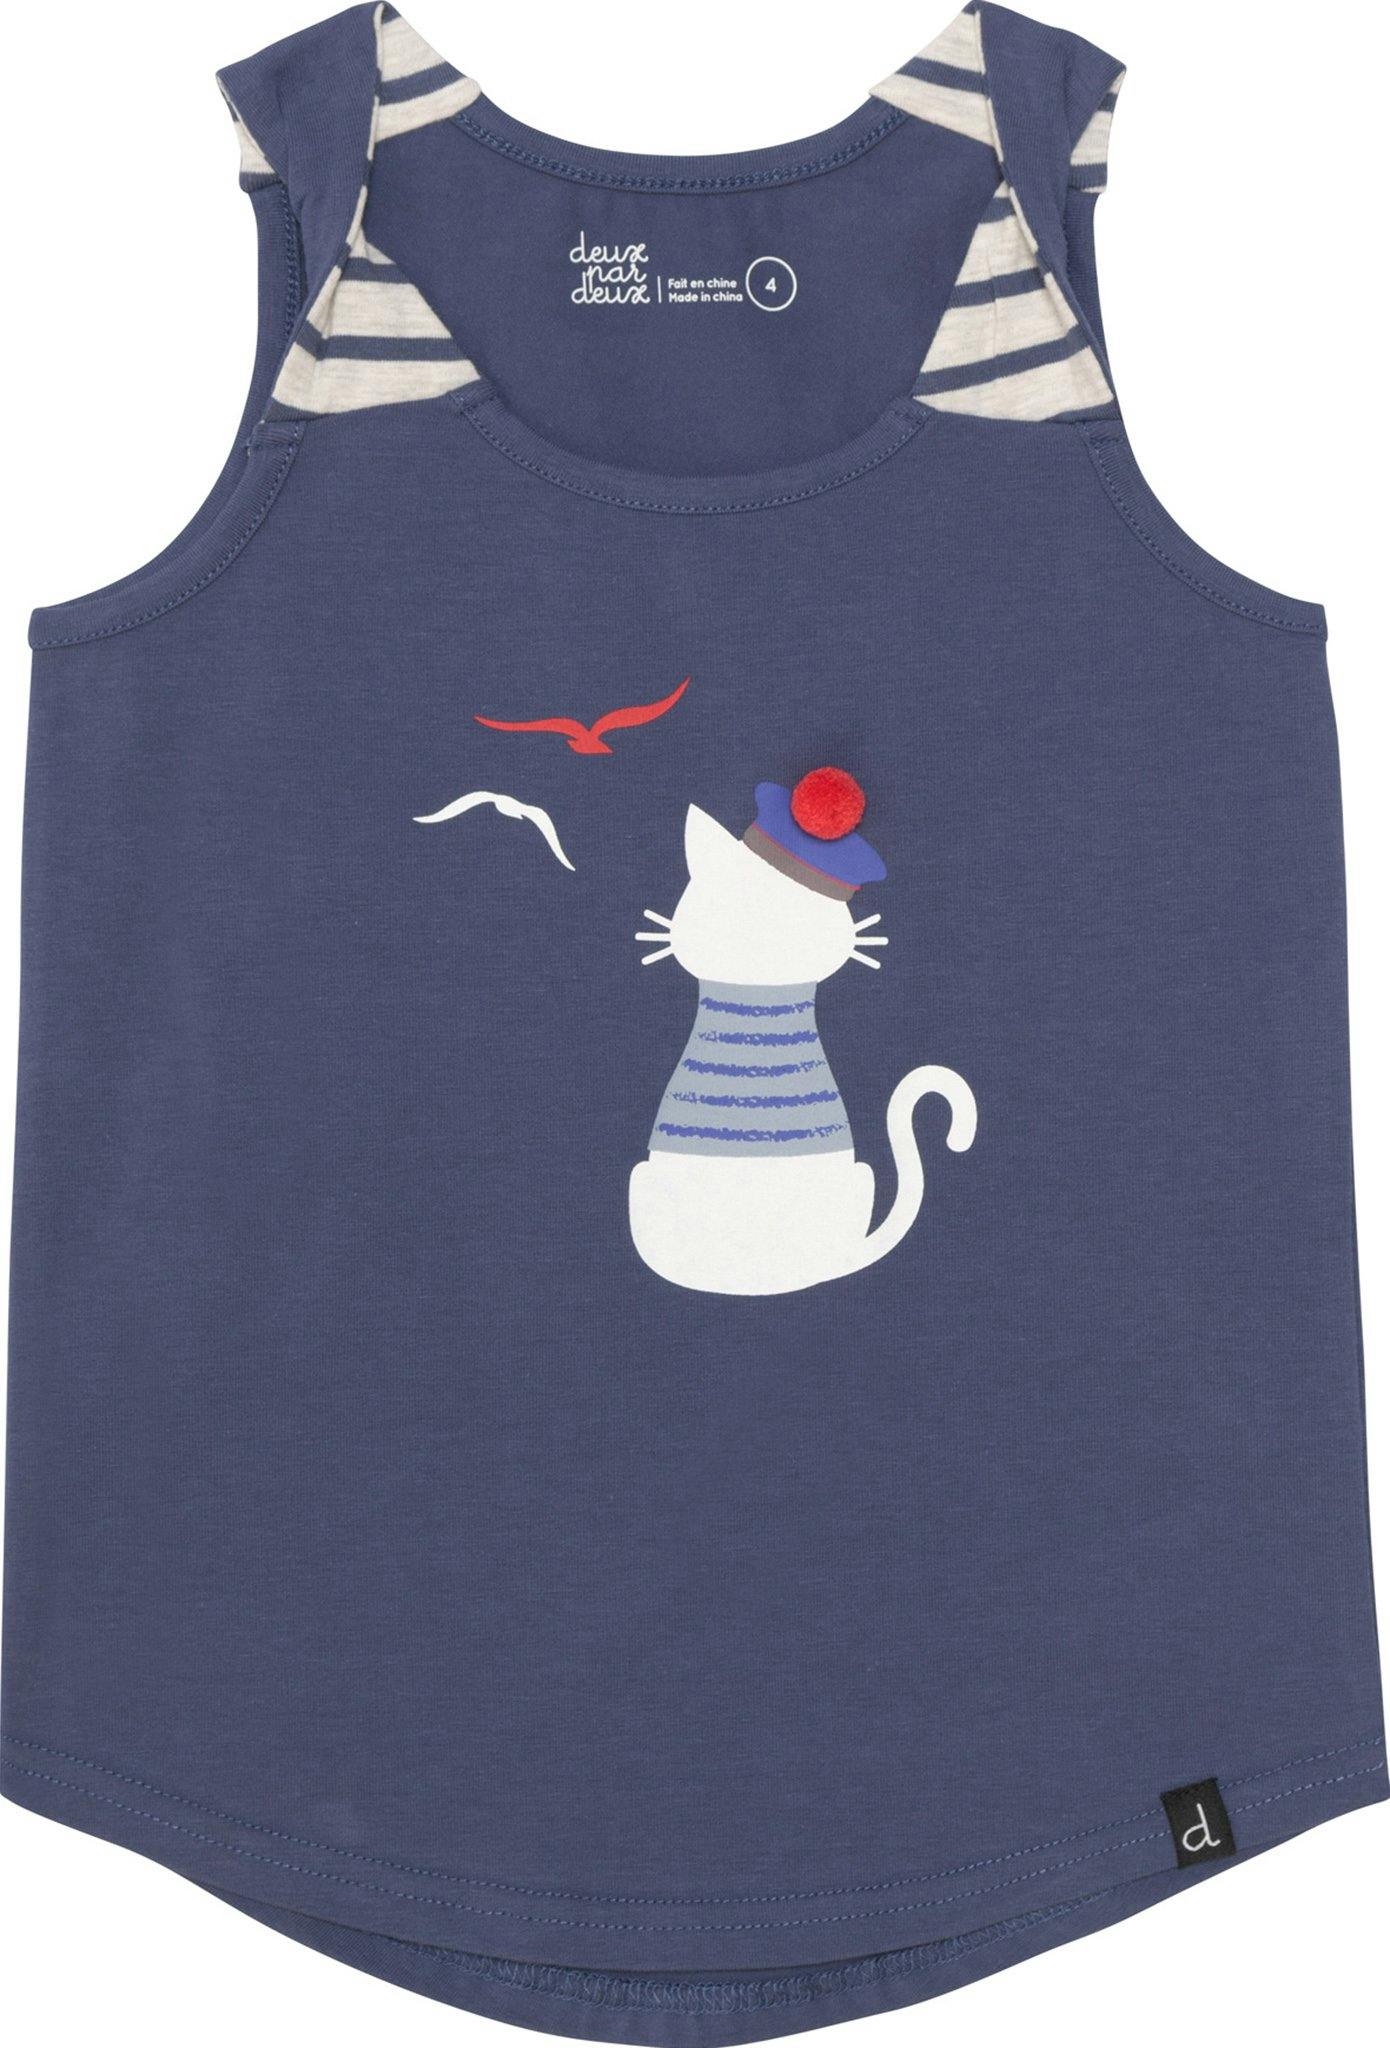 Product image for Organic Cotton Graphic Tank Top - Little Girls